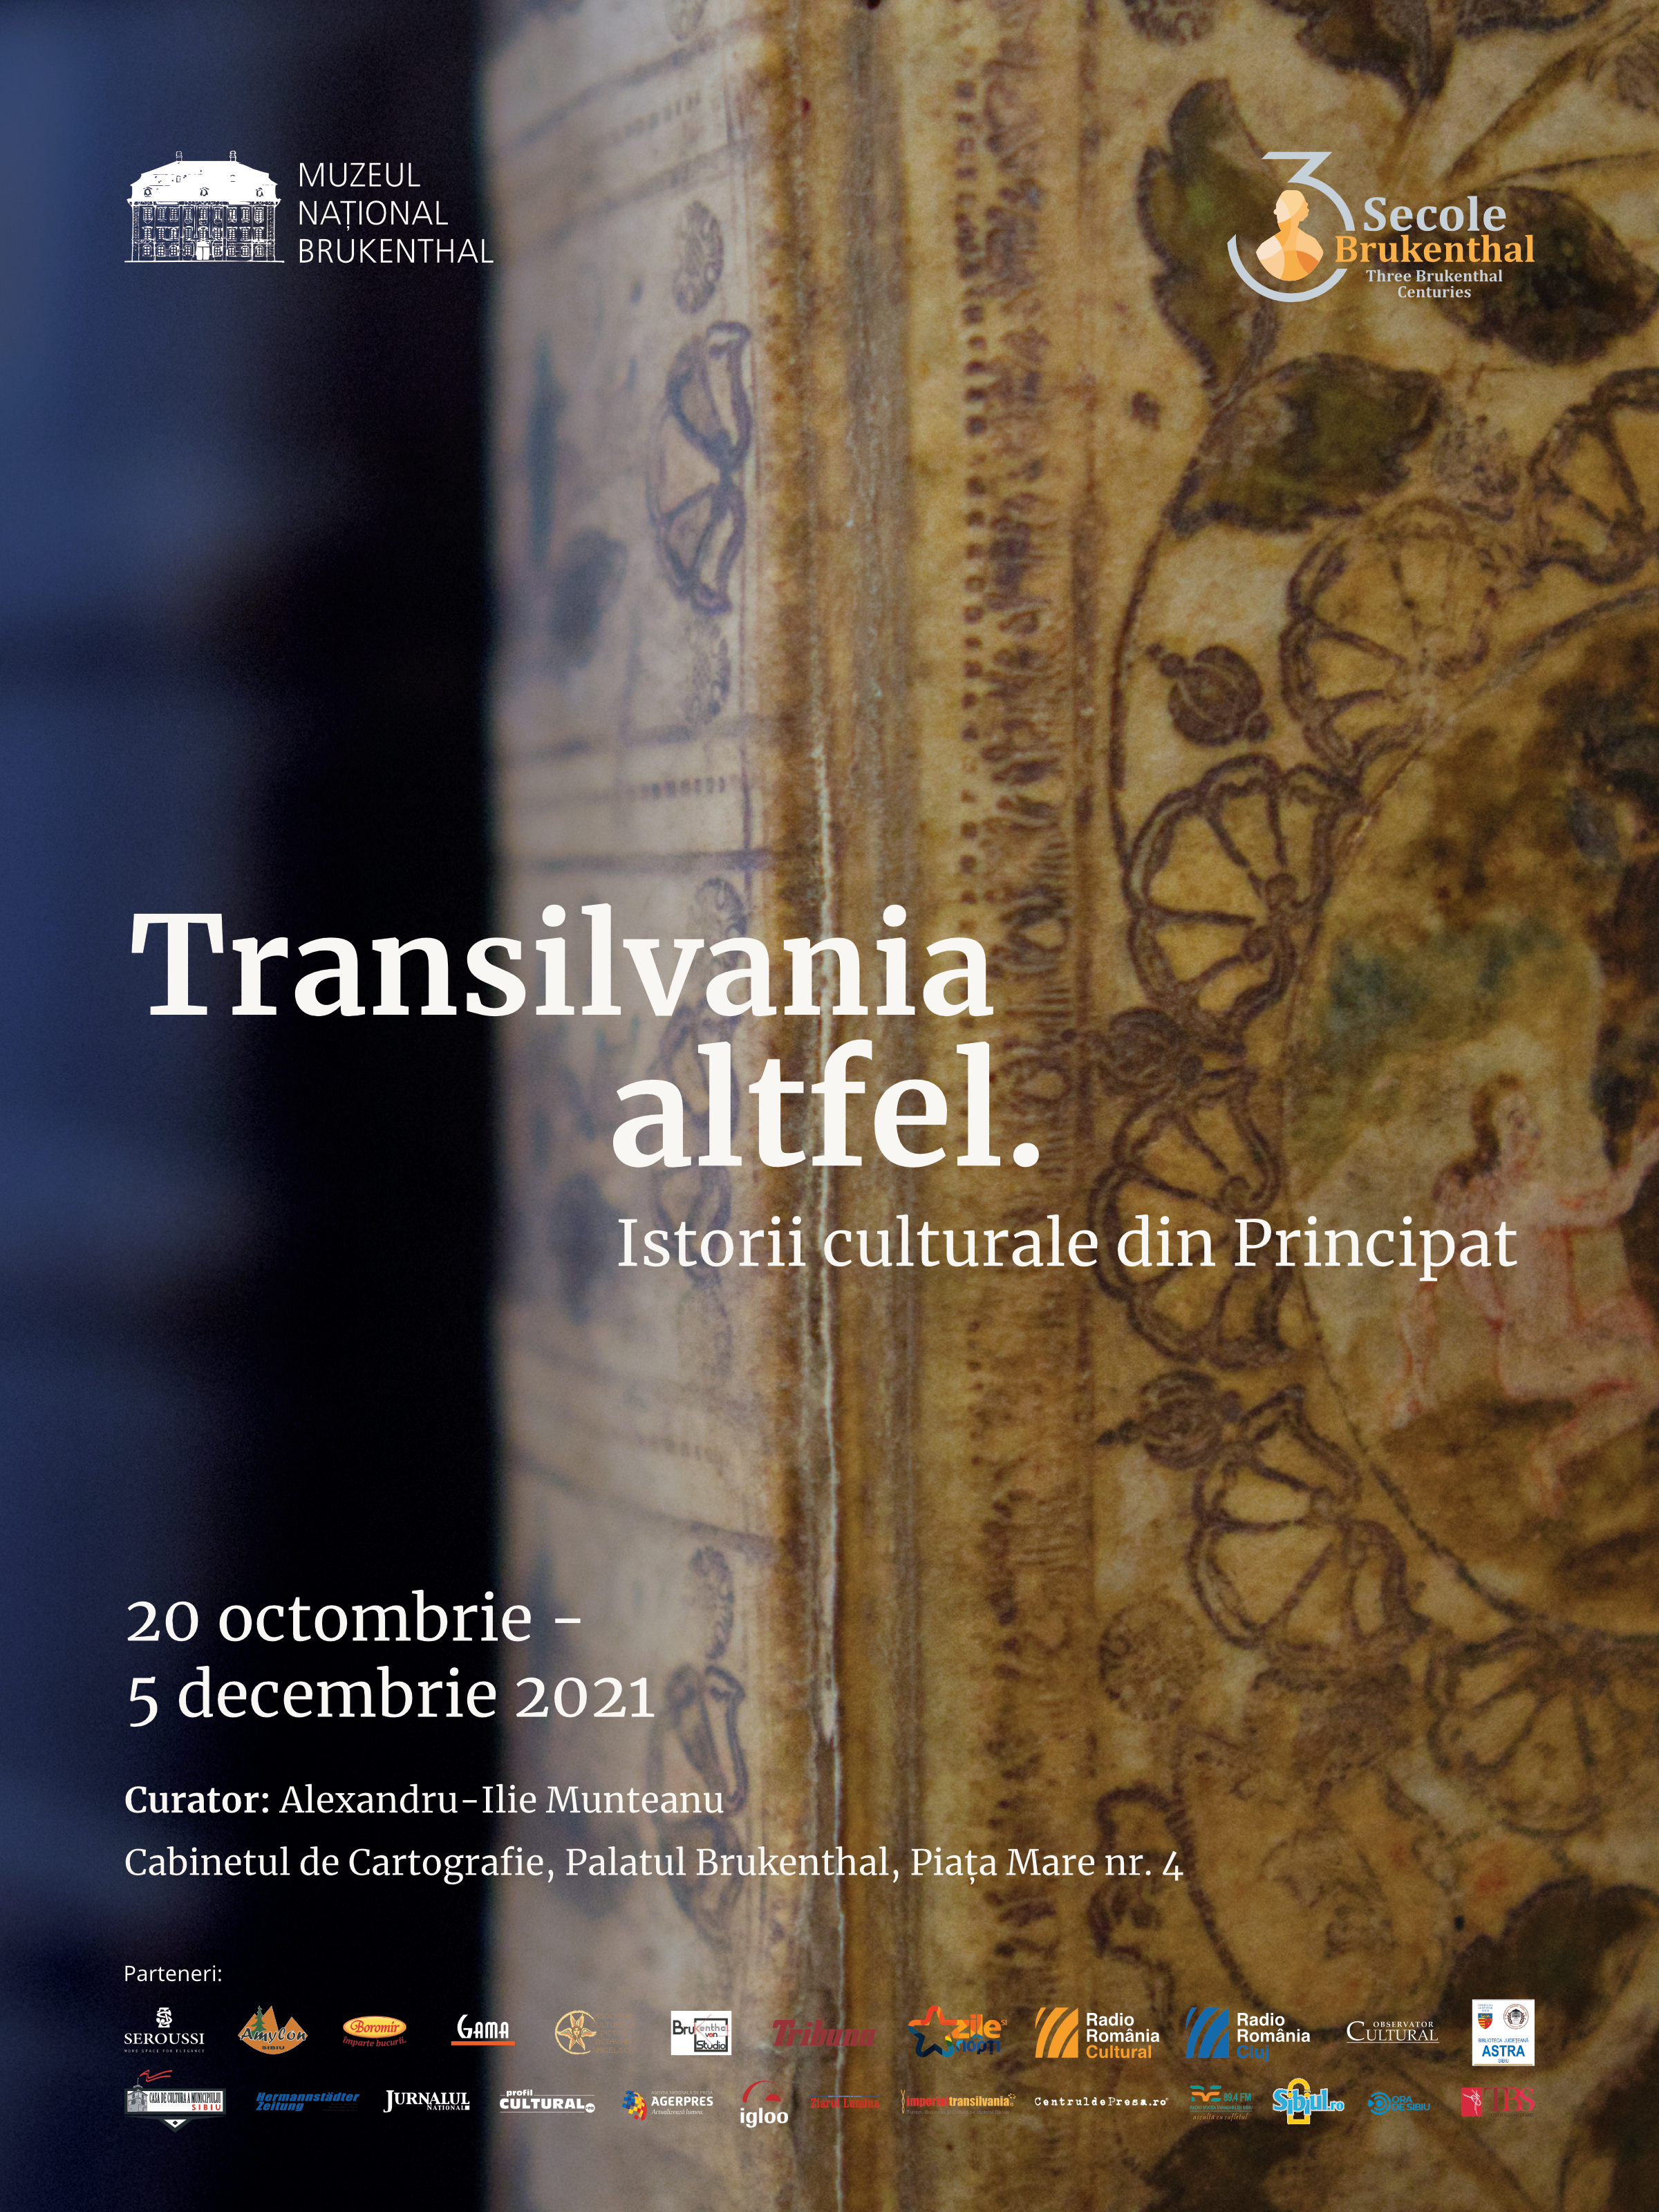 Transylvania differently. Cultural histories from the Principality